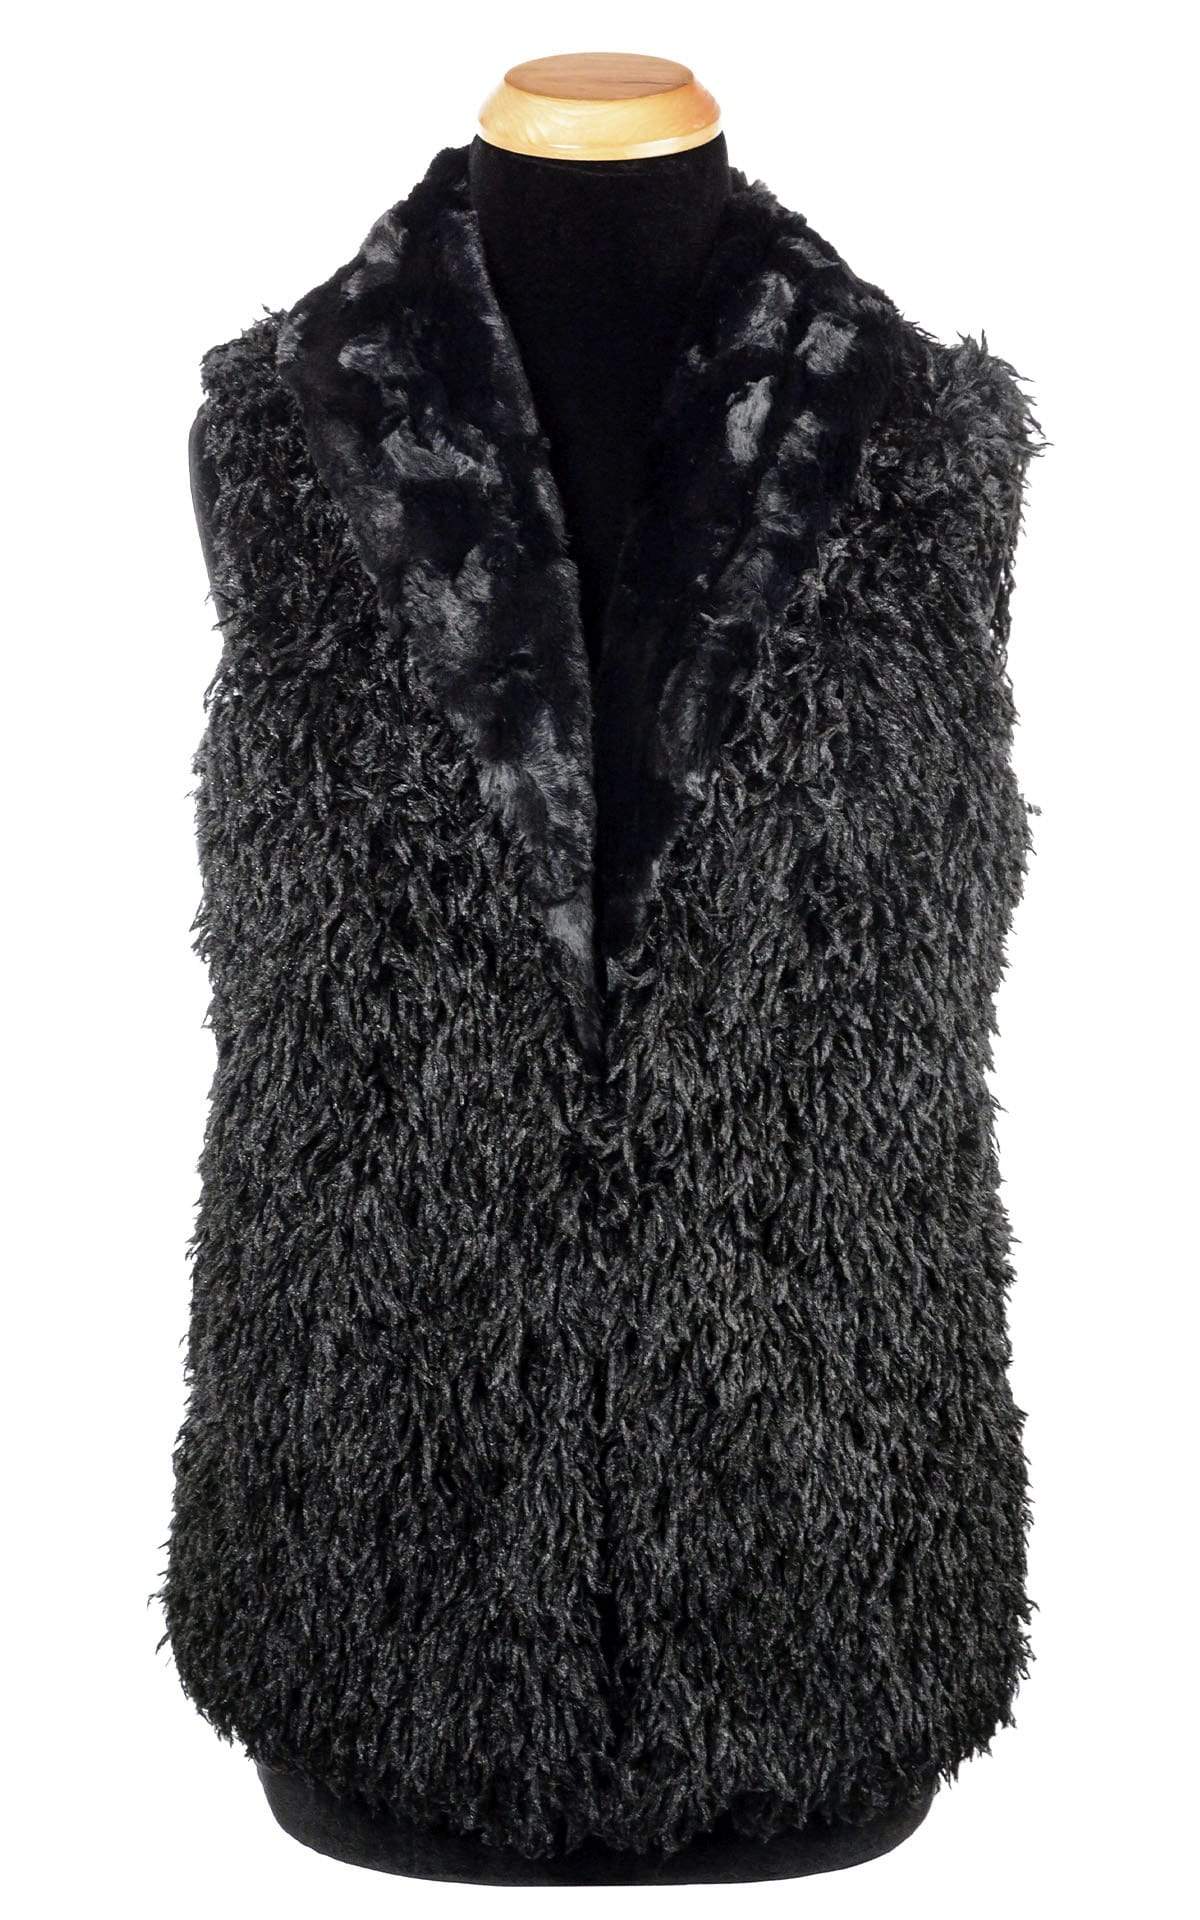 Shawl Collar Vest - Black Swan Faux Feather with Assorted Faux Fur